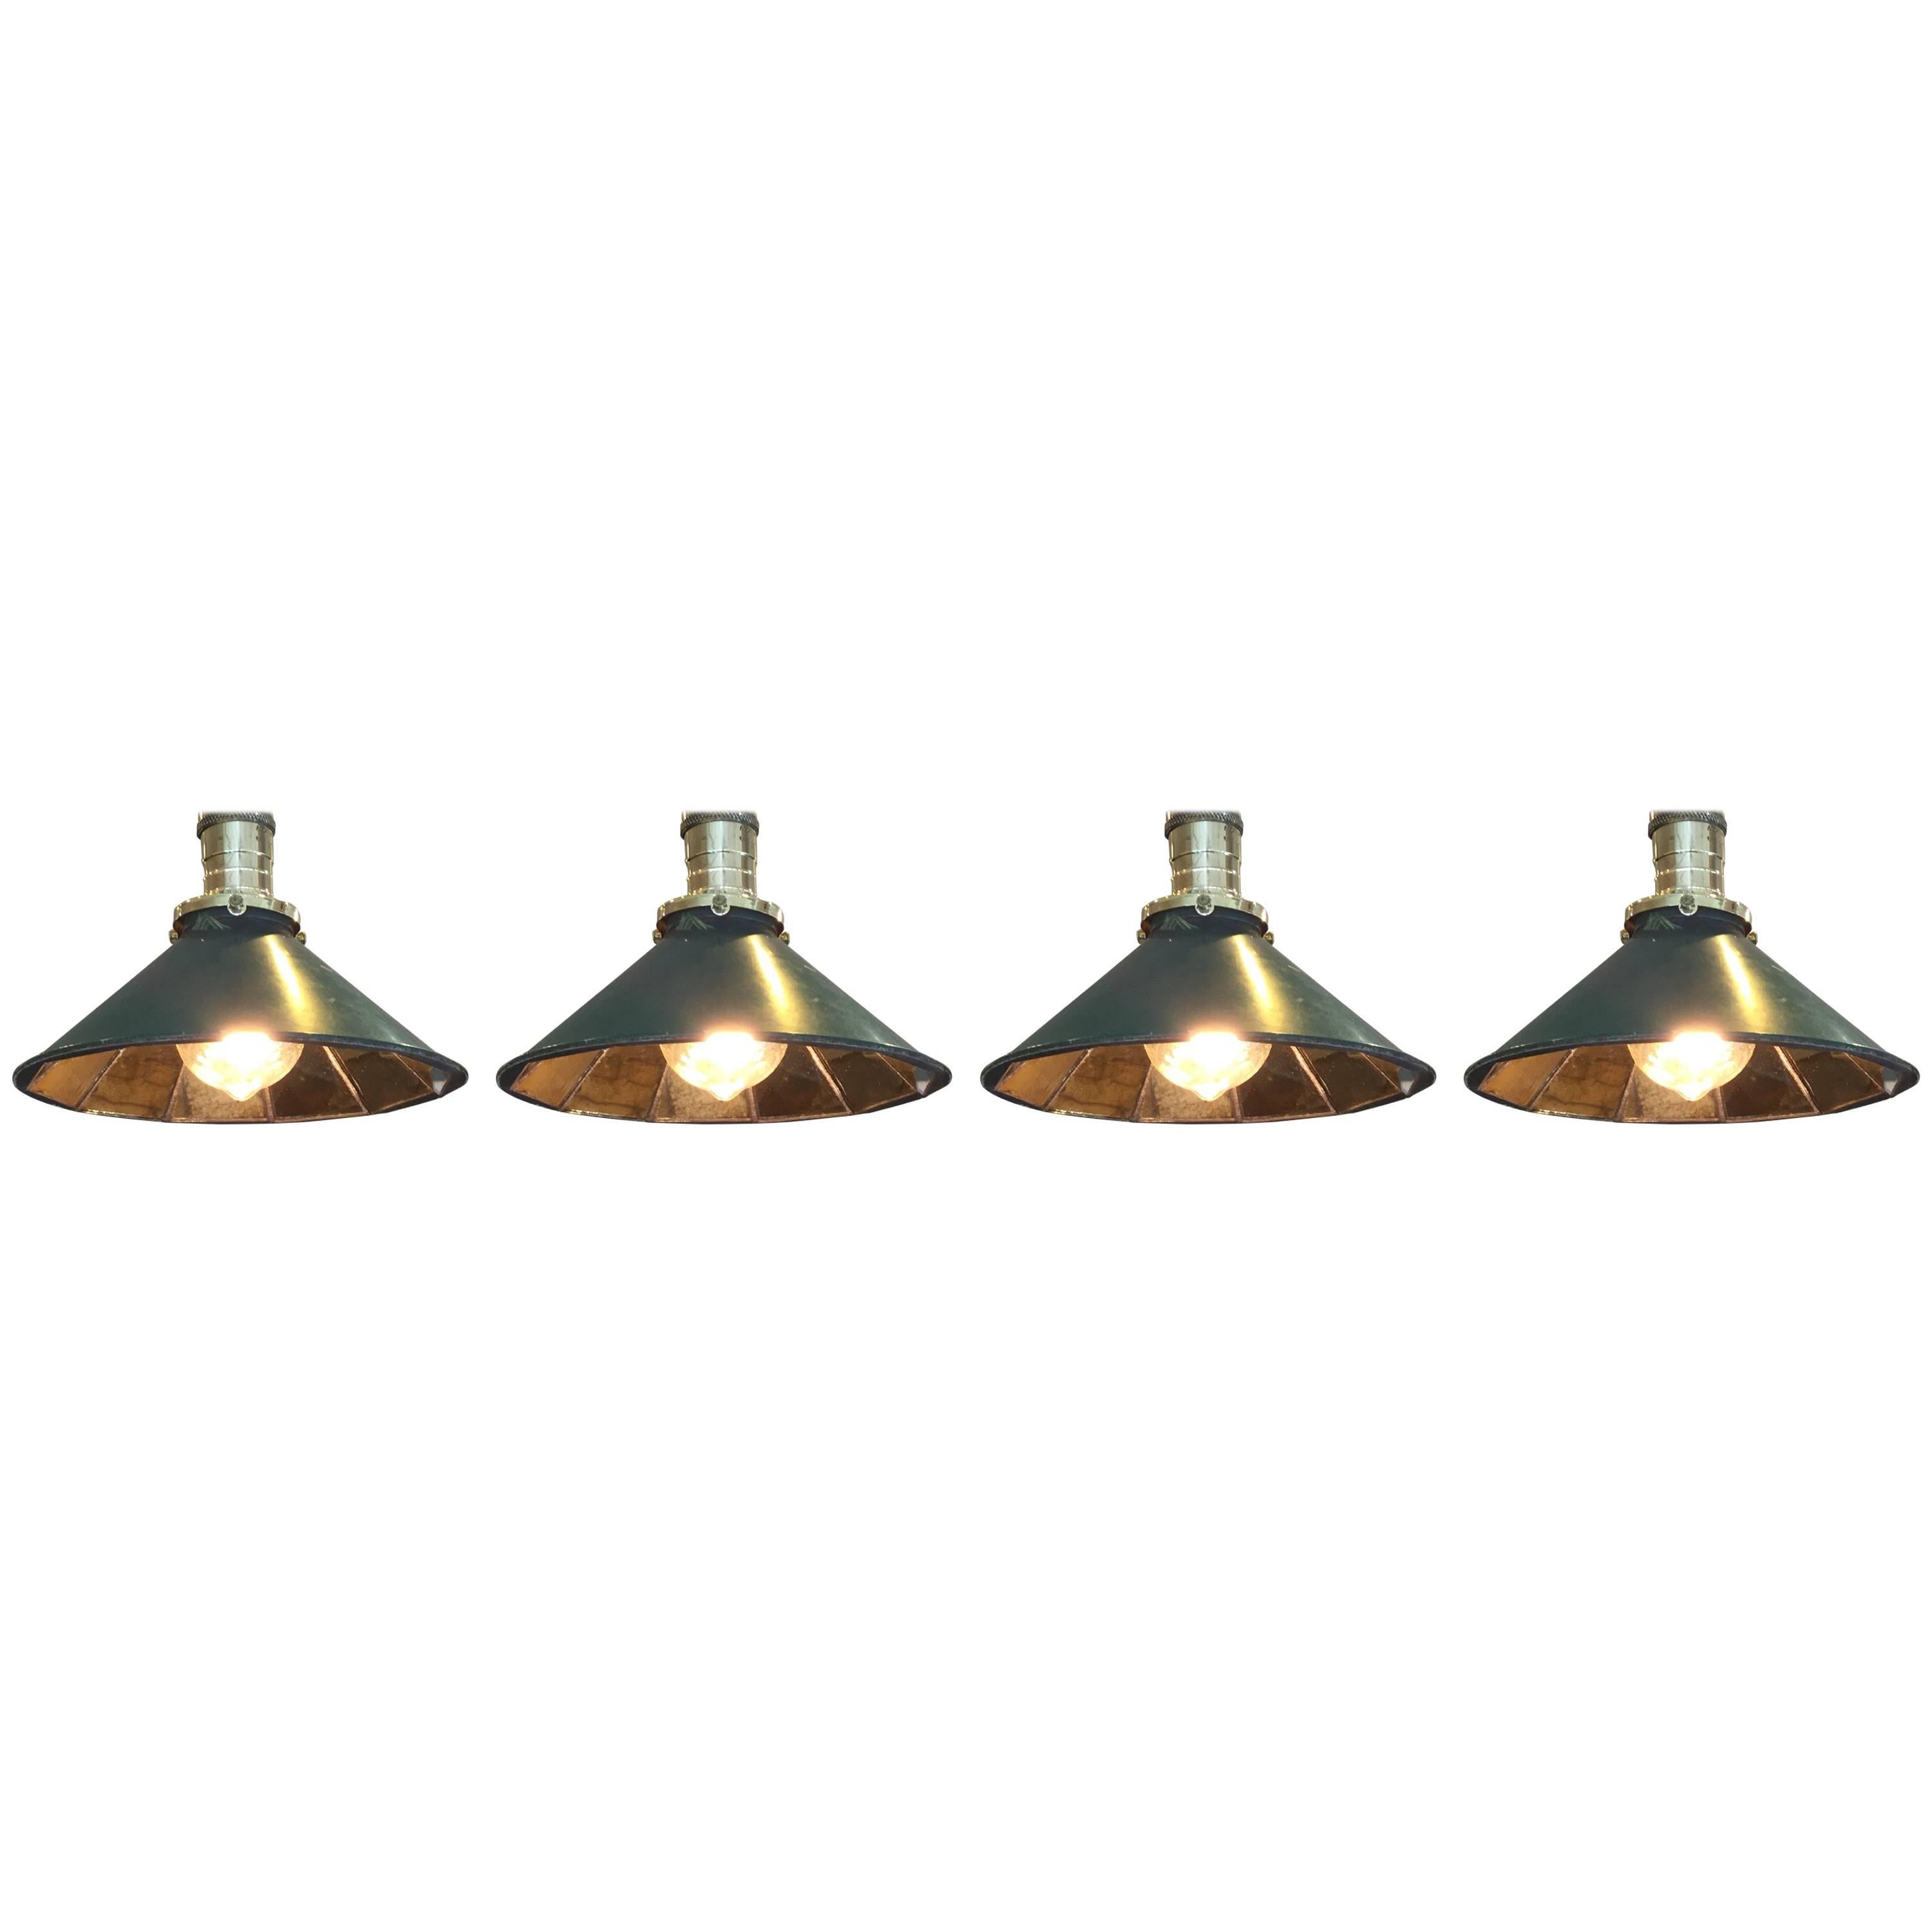 Four Small Industrial Mirrored Shade Pendants For Sale